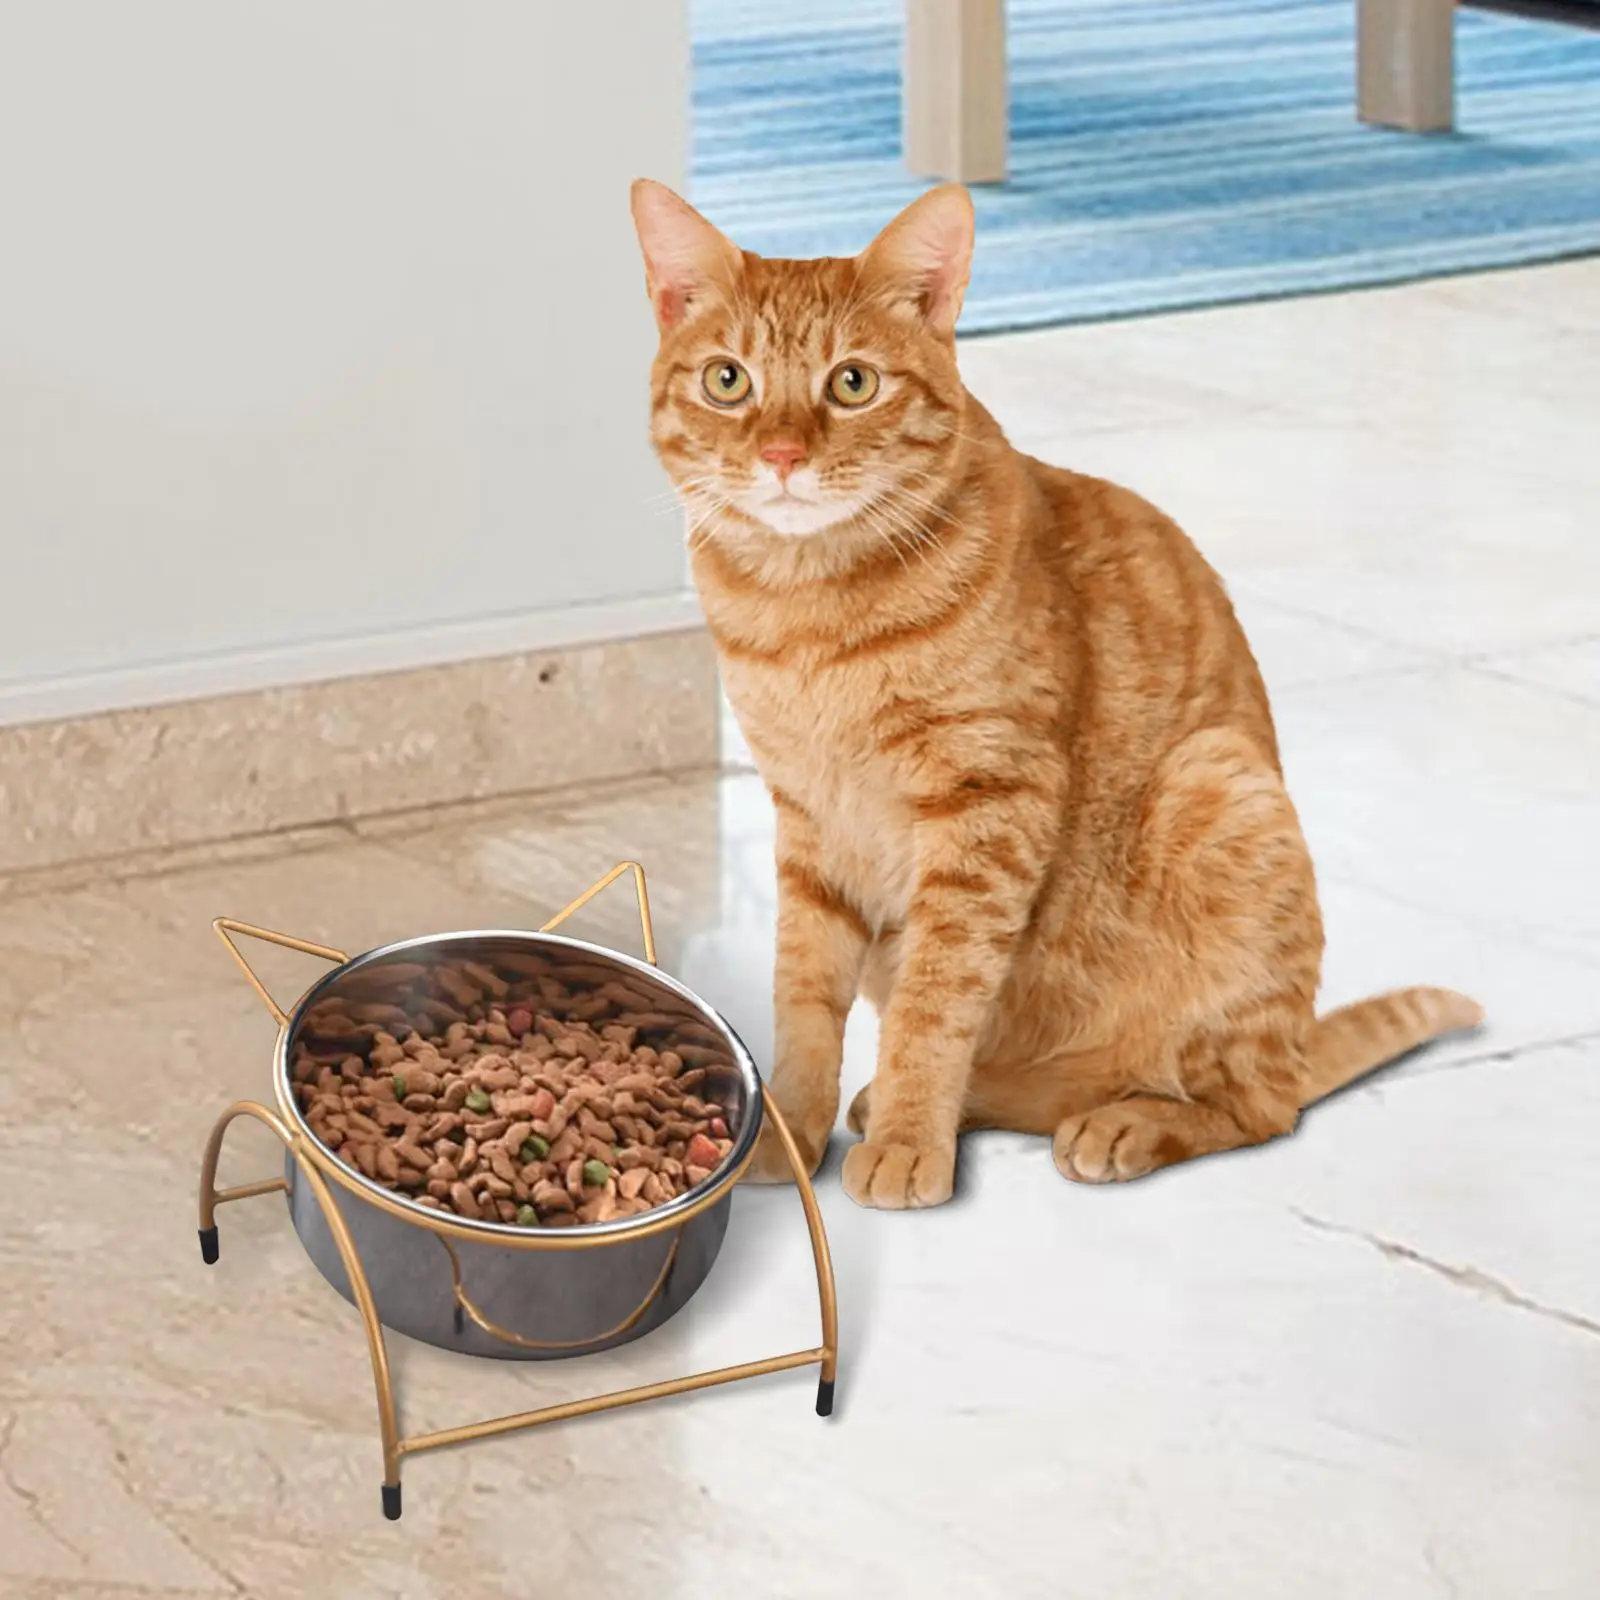 Elevated Cat Bowl Raised Cat Food Bowl Stainless Steel Drinking Raised Dog Bowl Food Container Cat Dish Feeder for Indoor Cats